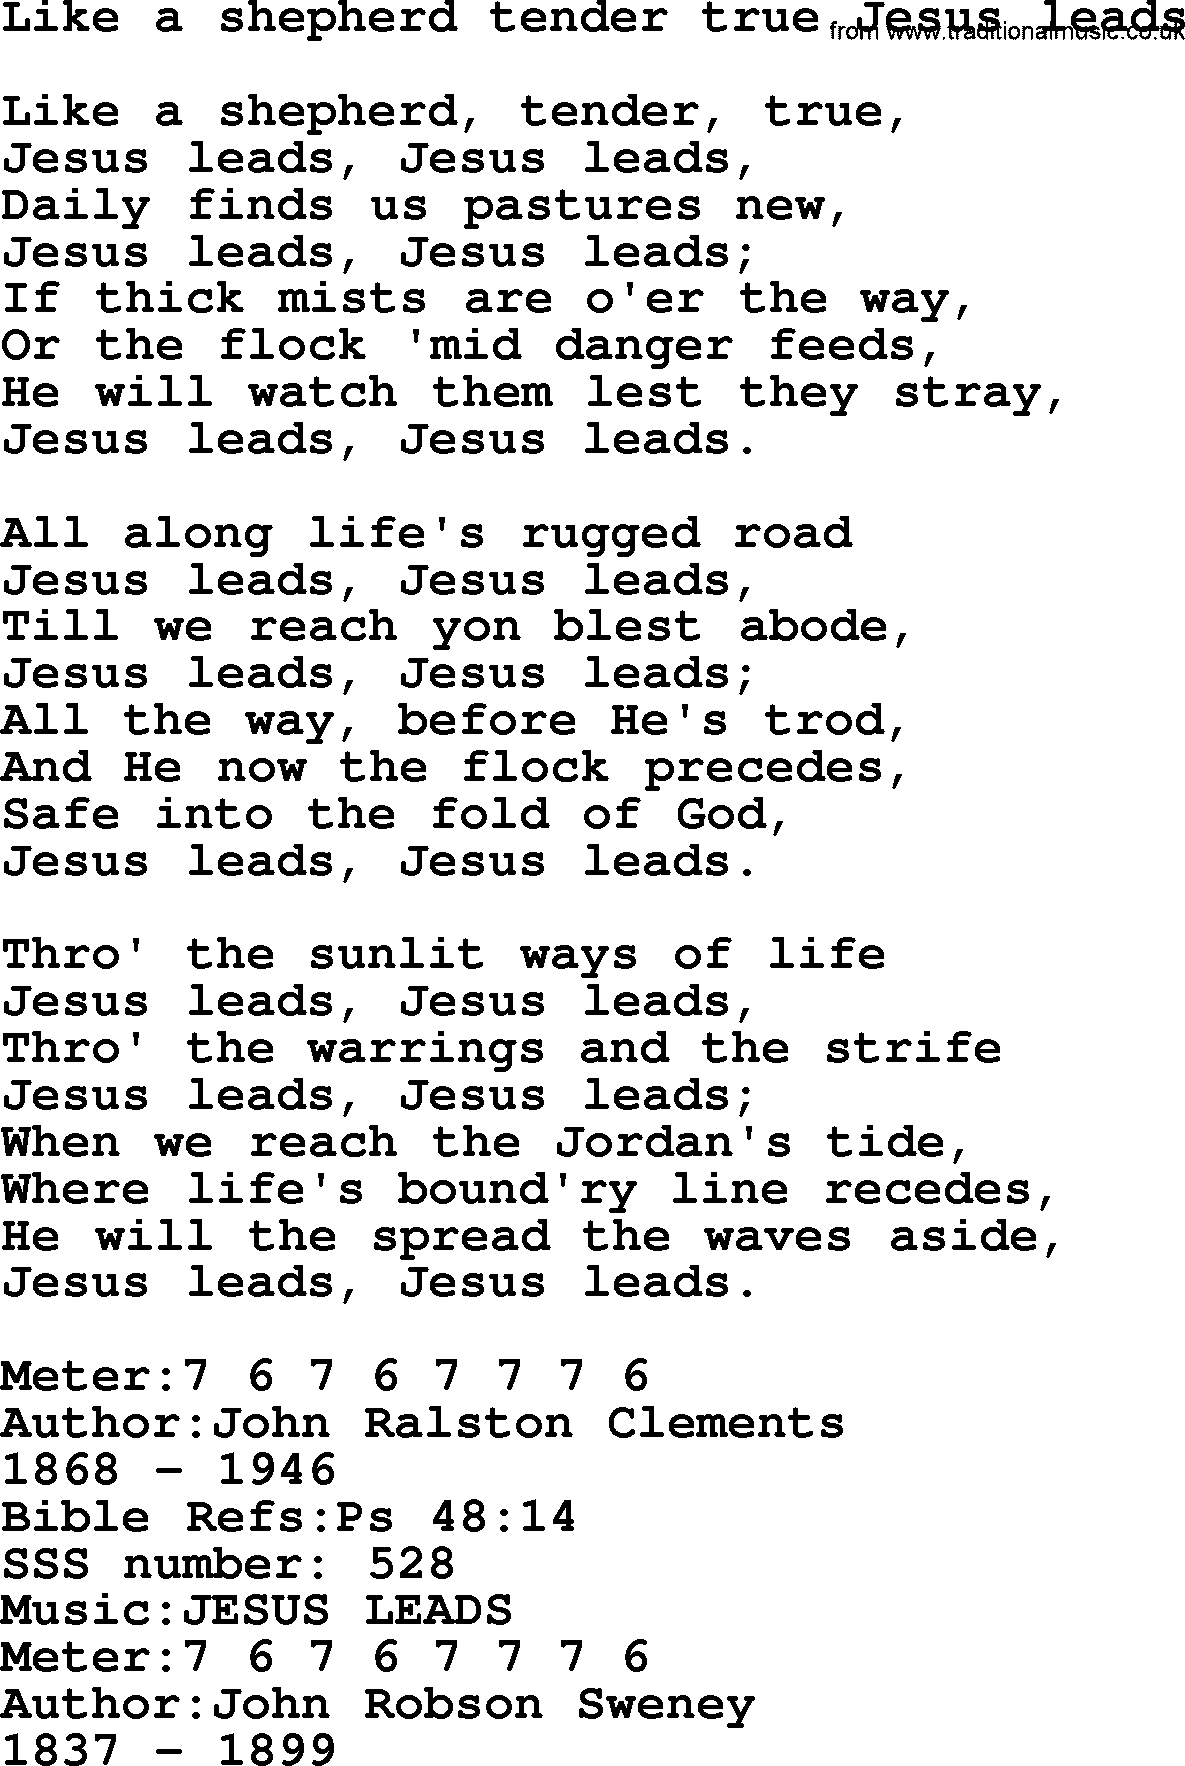 Sacred Songs and Solos complete, 1200 Hymns, title: Like A Shepherd Tender True Jesus Leads, lyrics and PDF